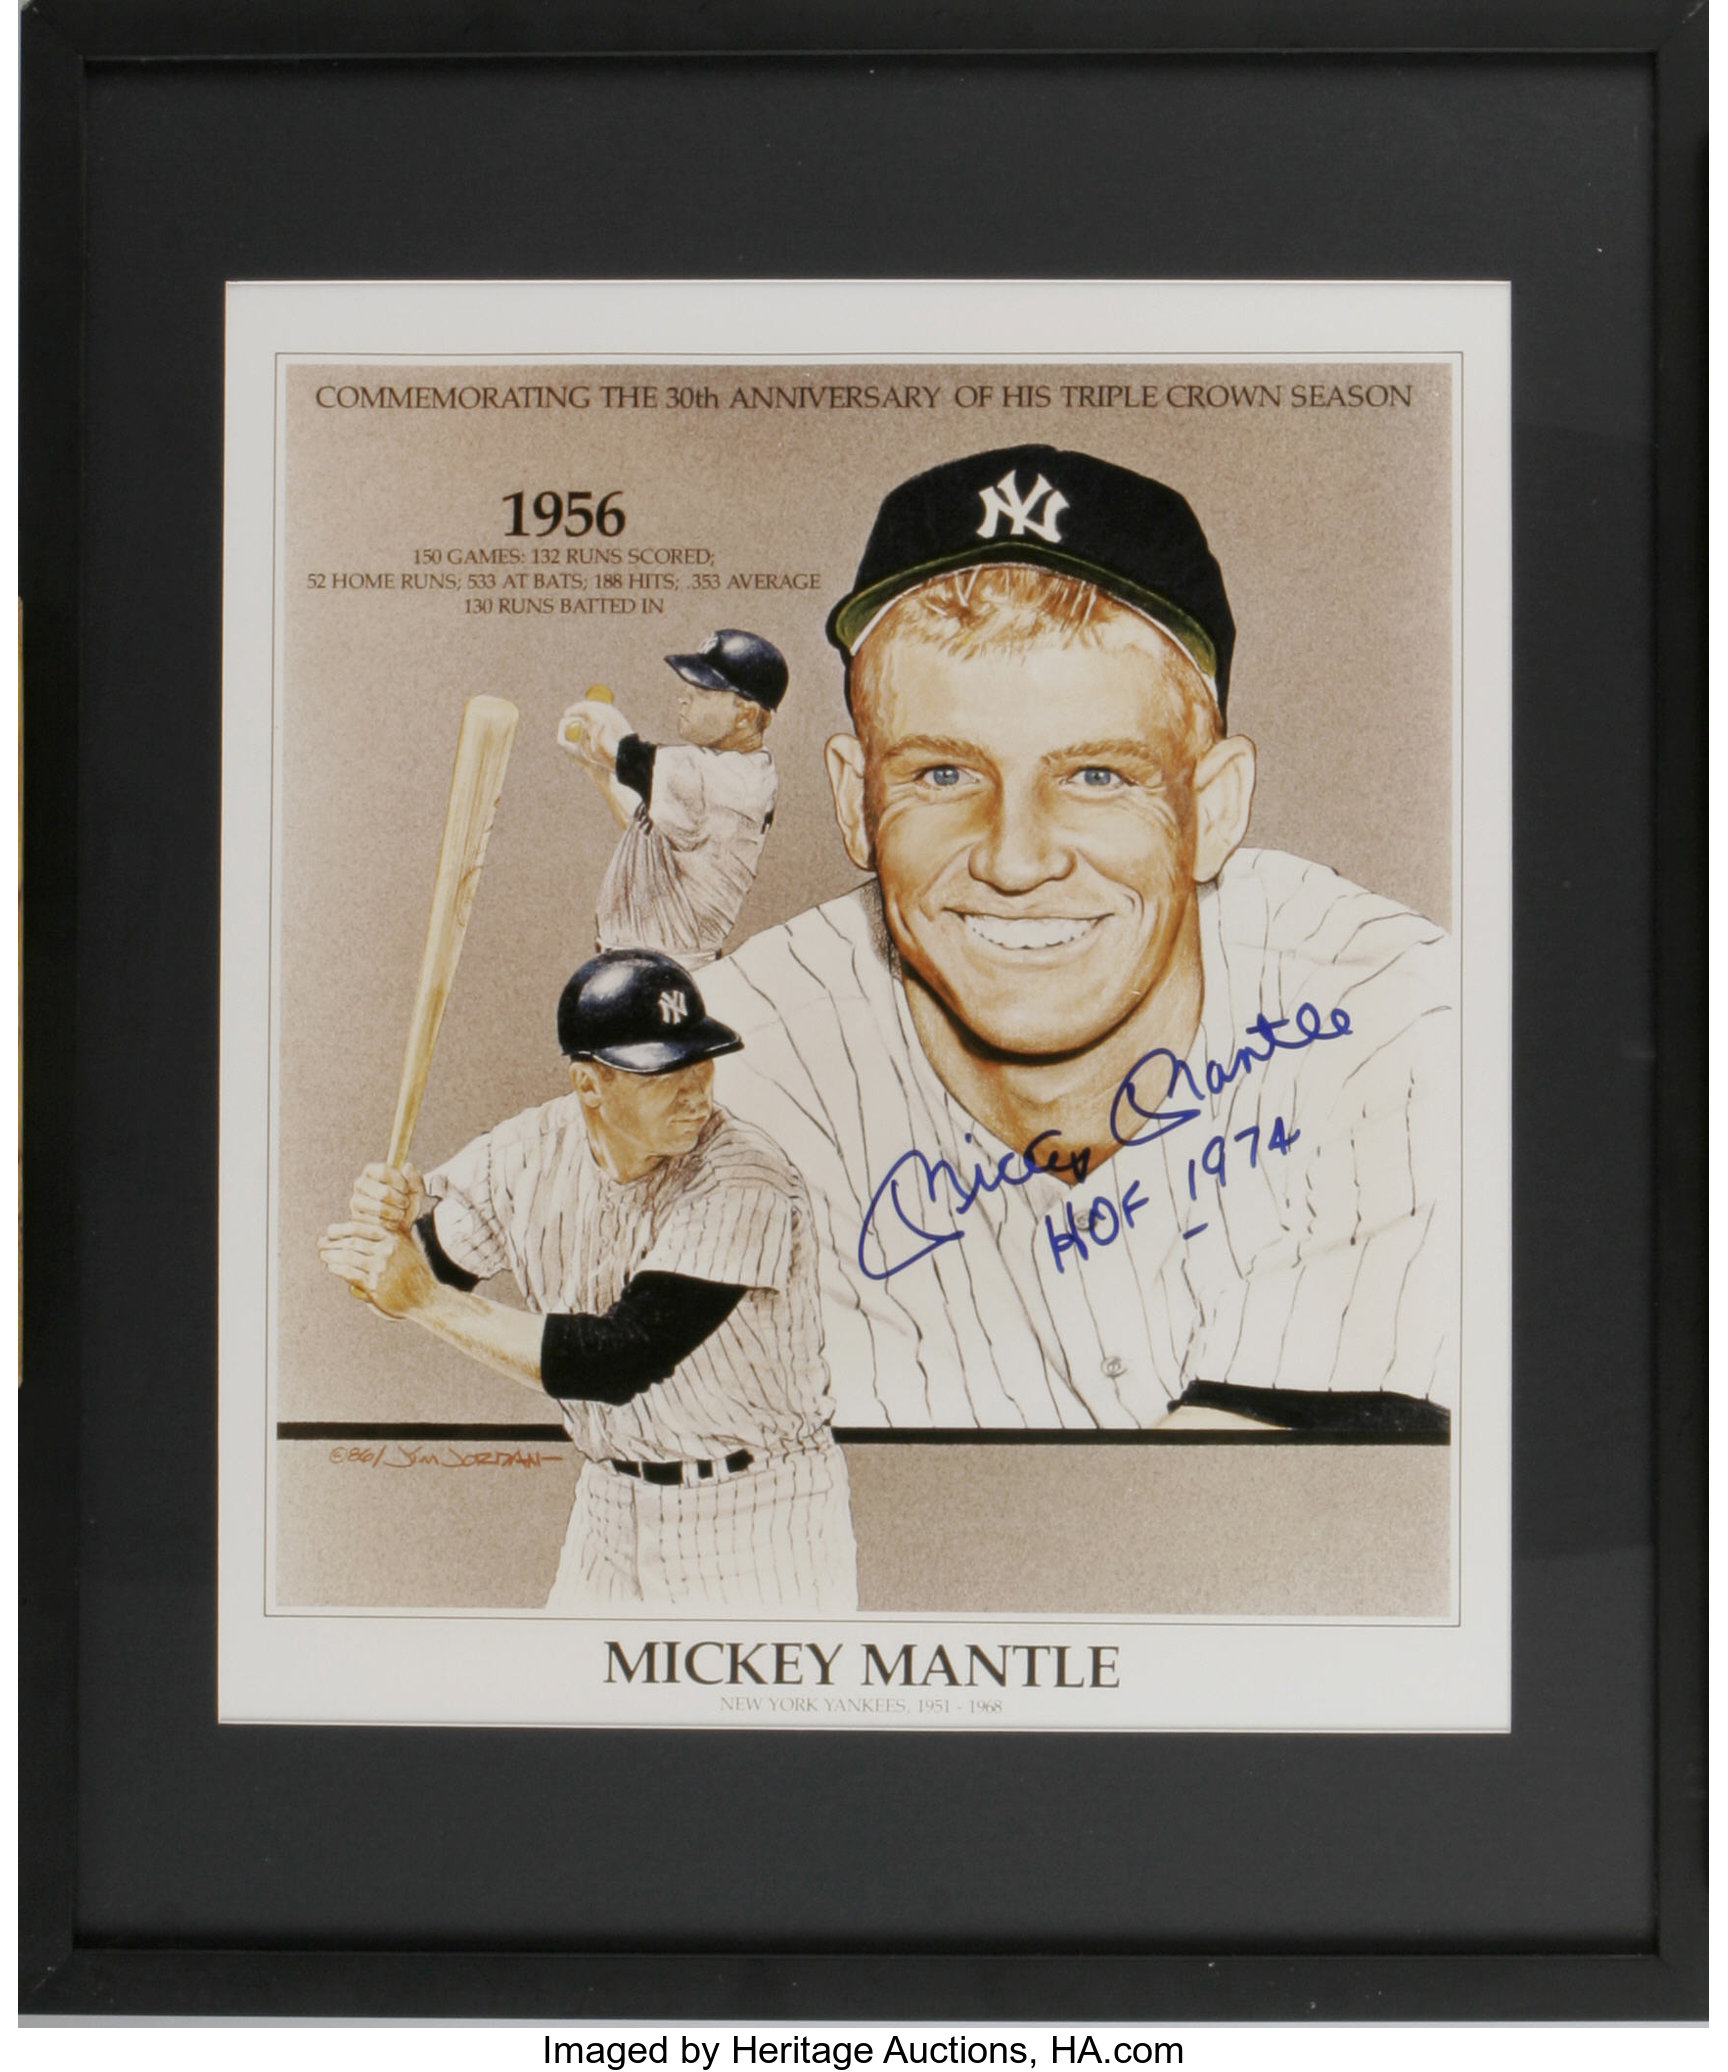 Mickey Mantle Triple Crown 1956 Signed Inscribed NY Yankees